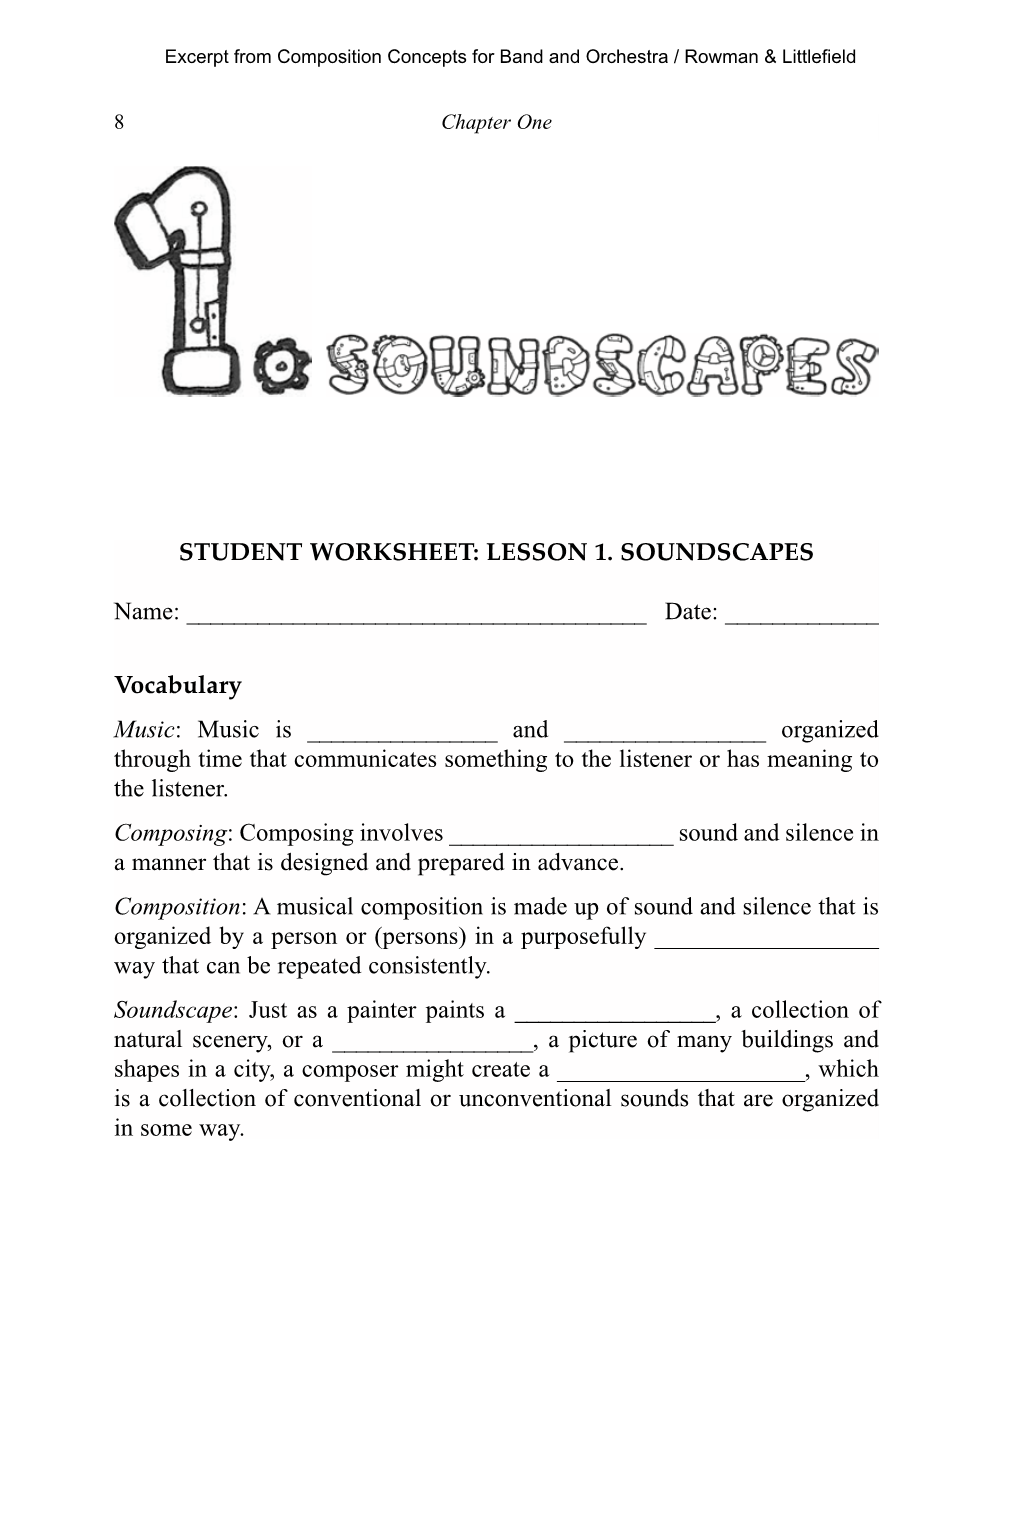 STUDENT WORKSHEET: LESSON 1. SOUNDSCAPES Name: Date: ___Vocabulary Music: Mu